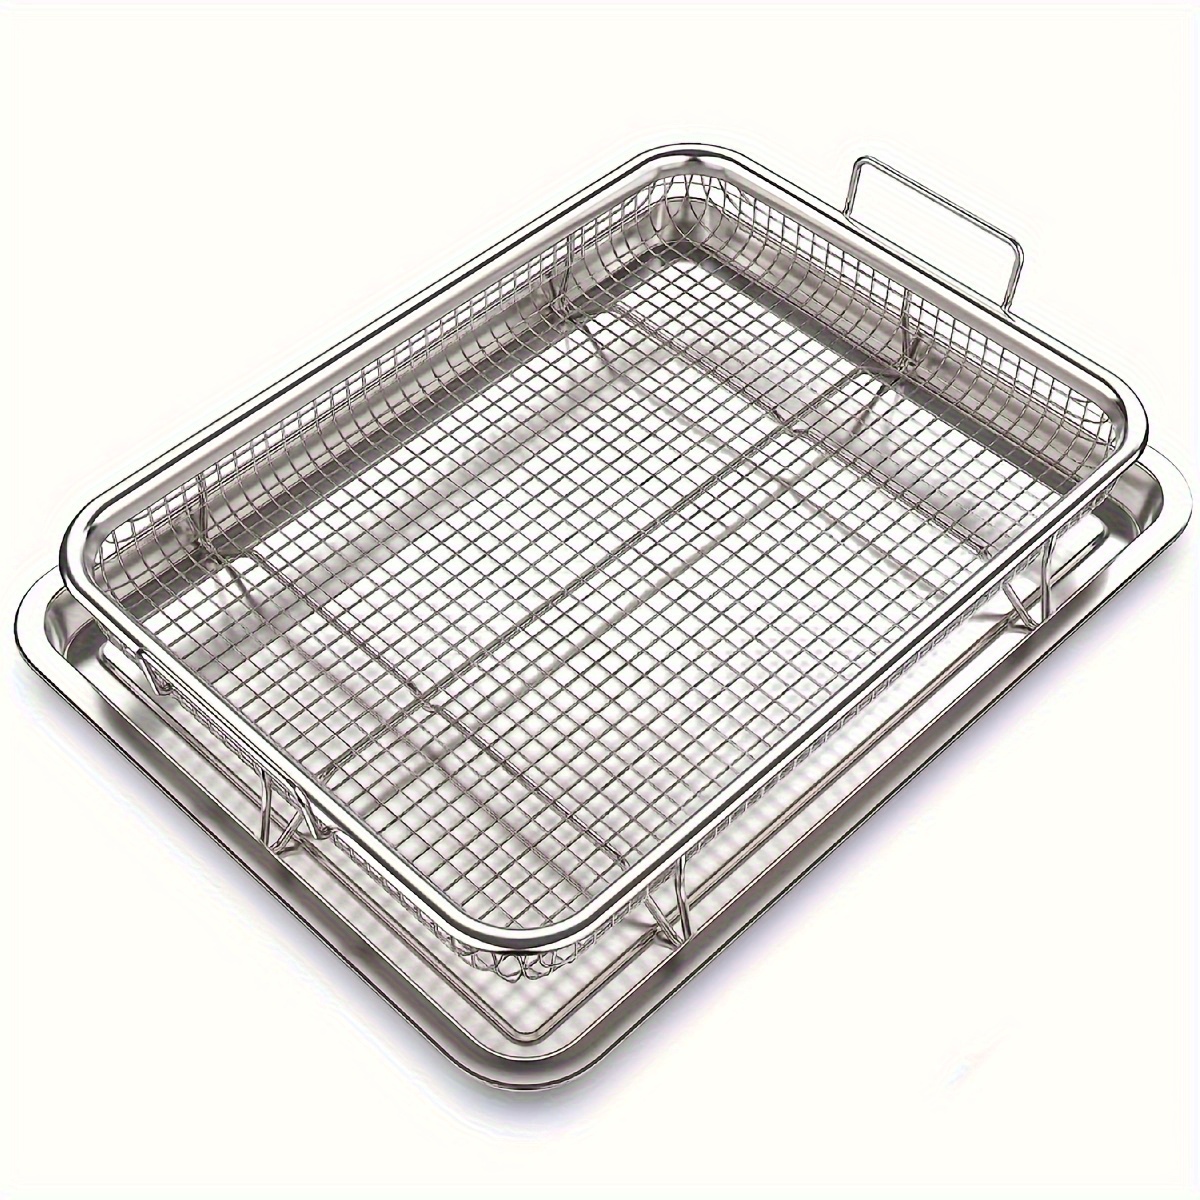 

2pcs/set, Oven Air Fryer Basket, 12.8" X 9.6" Stainless Steel Crisper Box Tray And Pan, Grilling Pan Ideal For Grilling, Kitchen Supplies, Kitchen Accessories, Bbq Accessories